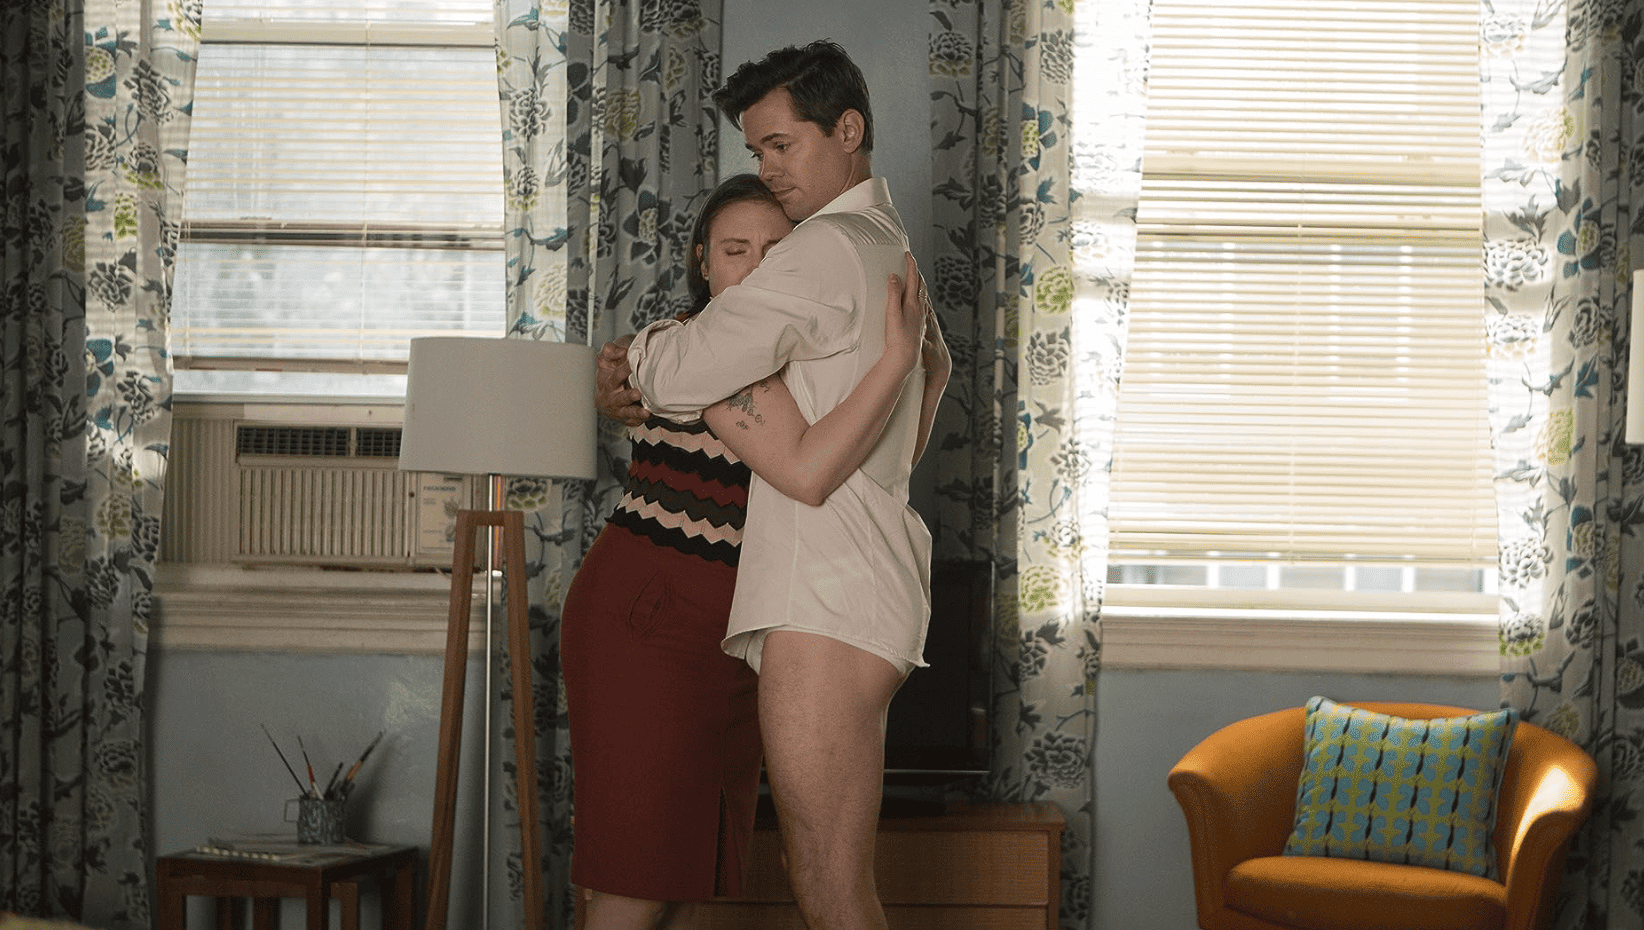 A woman and a man hug in a living room in this image from Apatow Productions.